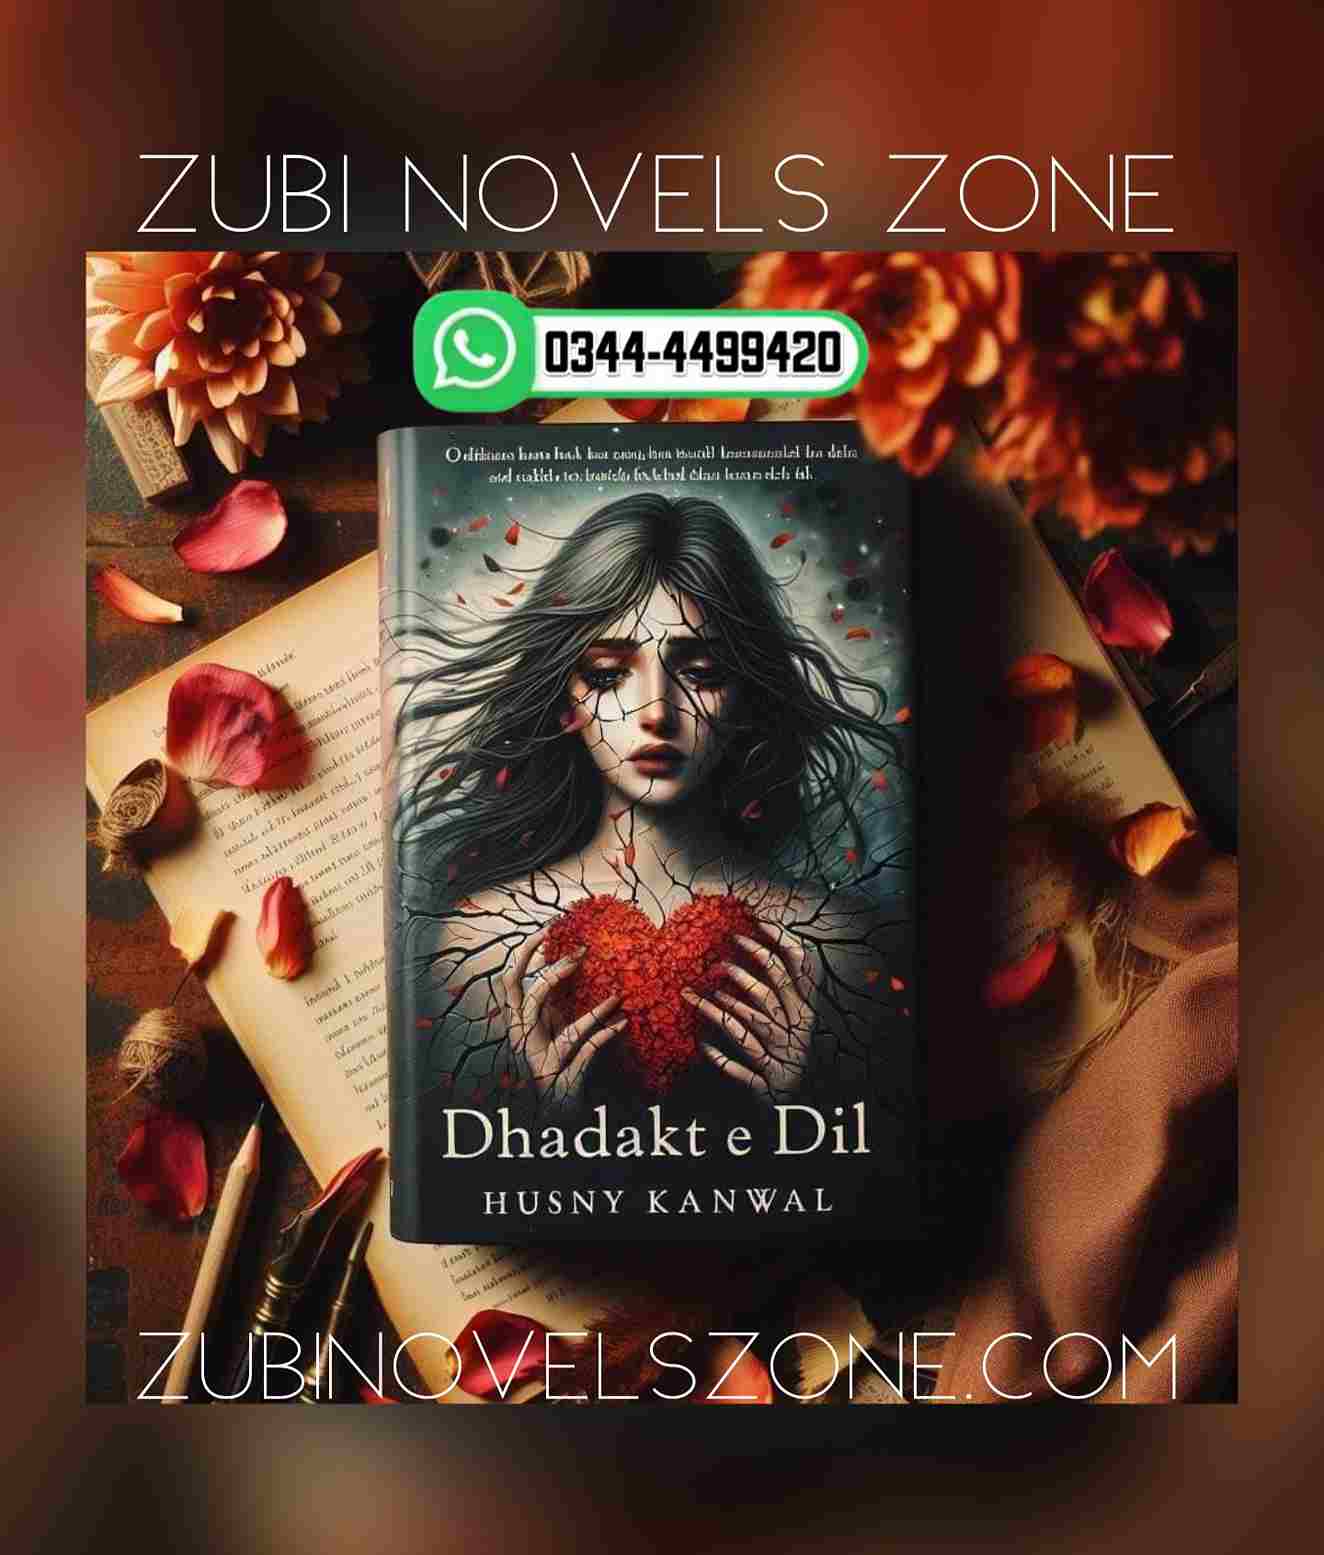 Dhadakte Dil Novel By Husny Kanwal Complete – ZNZ